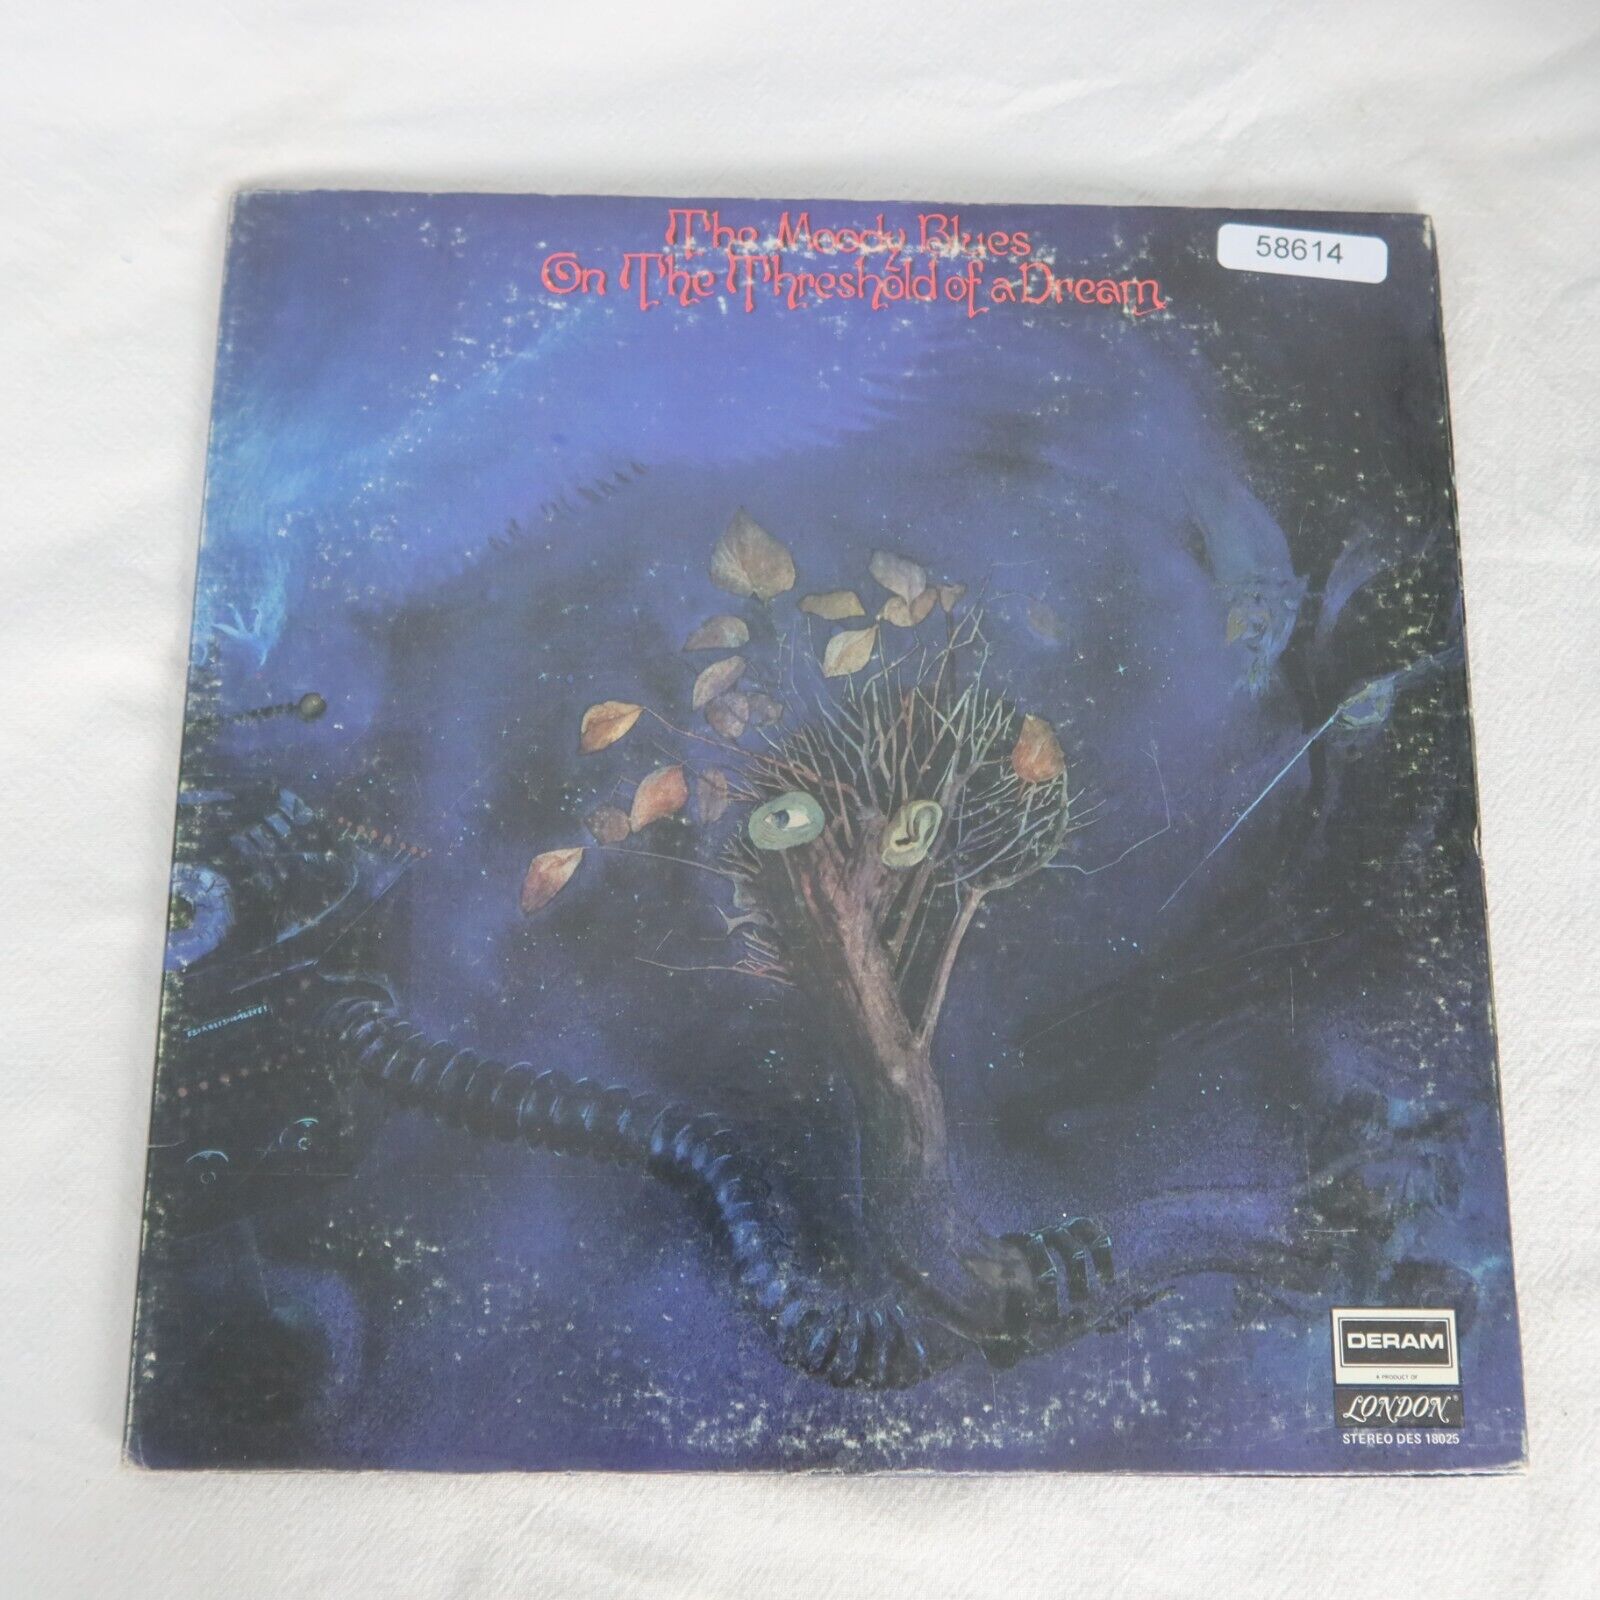 The Moody Blues On The Threshold Of A Dream LP Vinyl Record Album